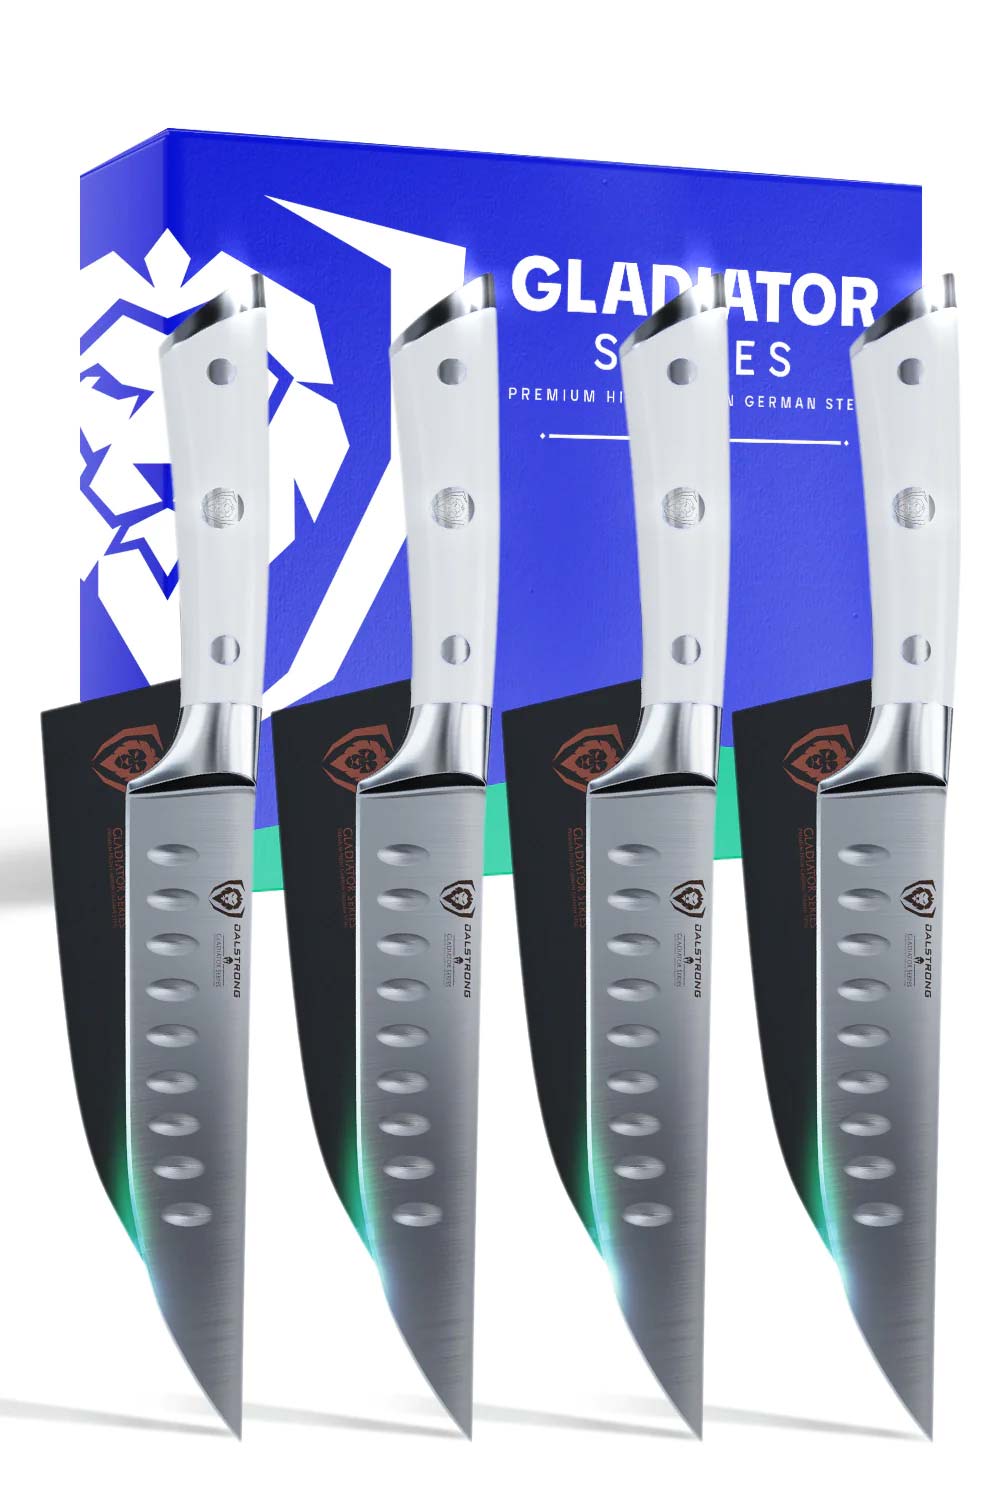 Dalstrong gladiator series 4 piece steak knife set with white handles in front of it's premium packaging.